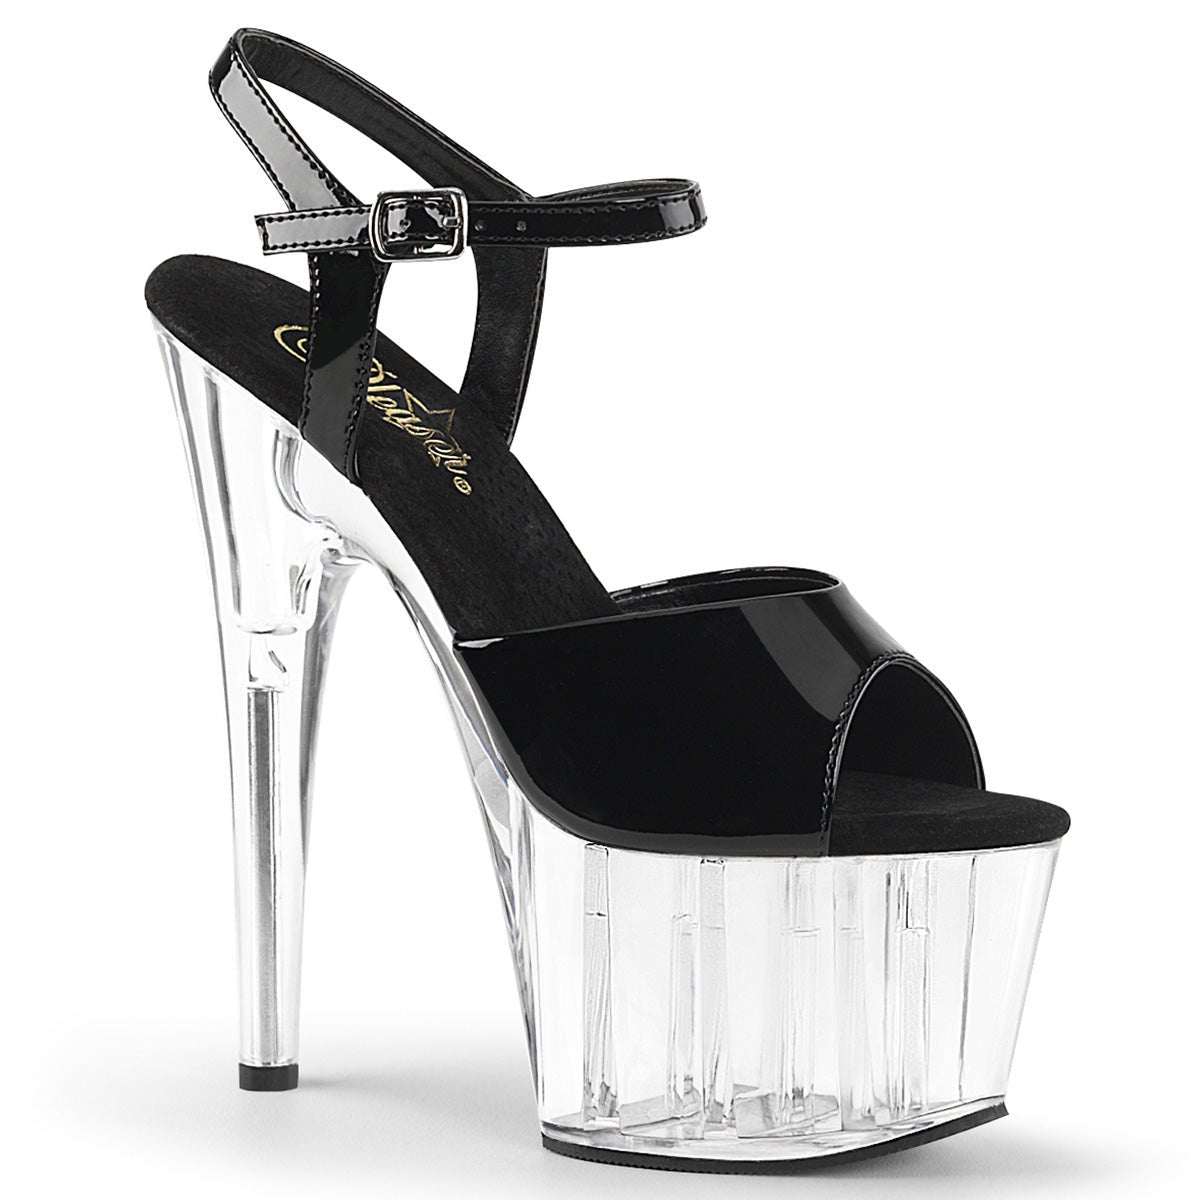 Pleaser ADORE 709-1 Sandals - From Pleaser Sold By Alternative Footwear